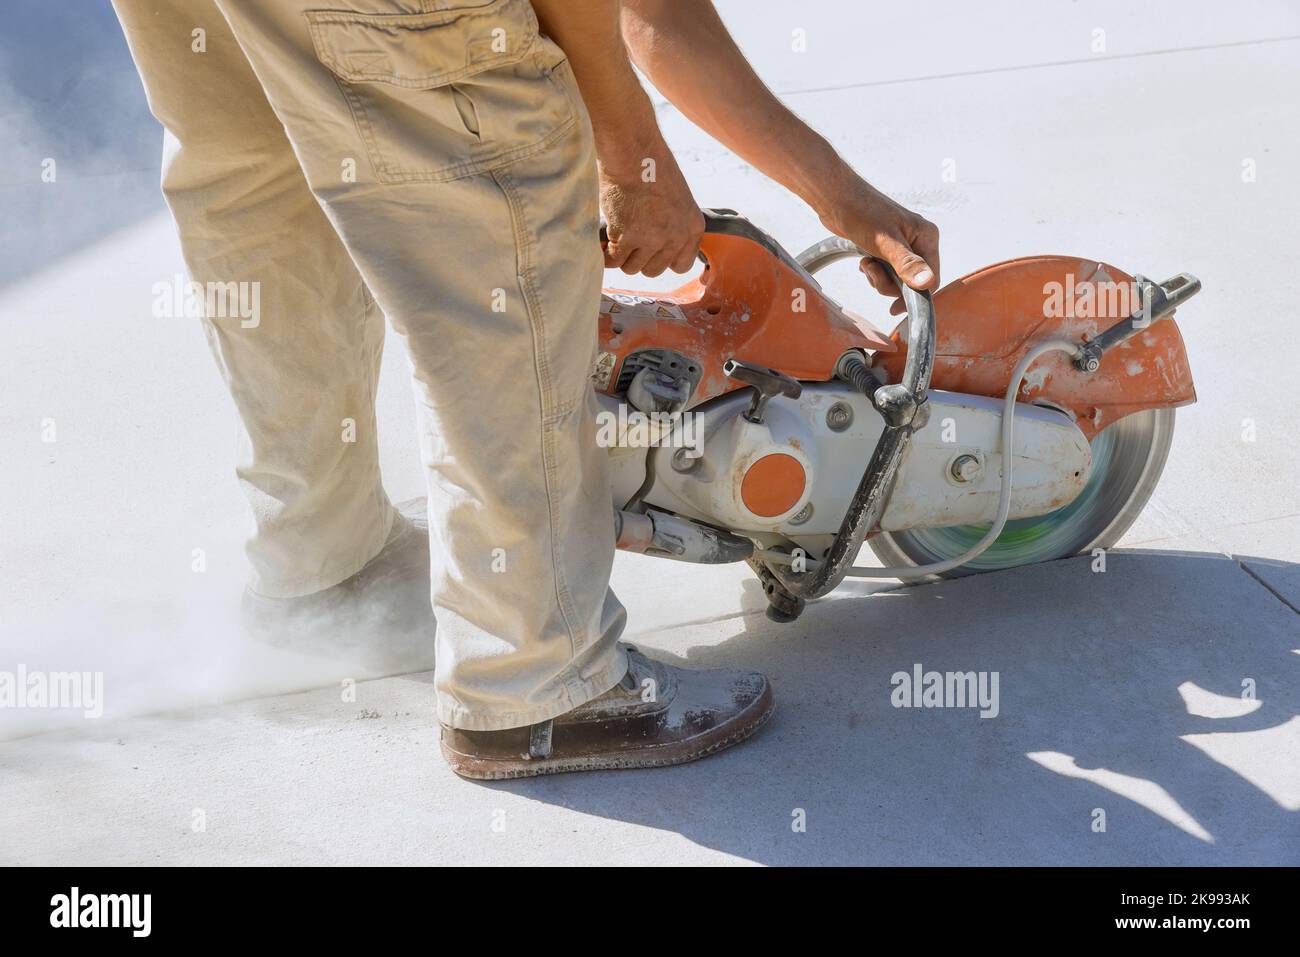 This is construction worker cutting concrete slabs for sidewalks using an diamond bladed saw cut off. Stock Photo